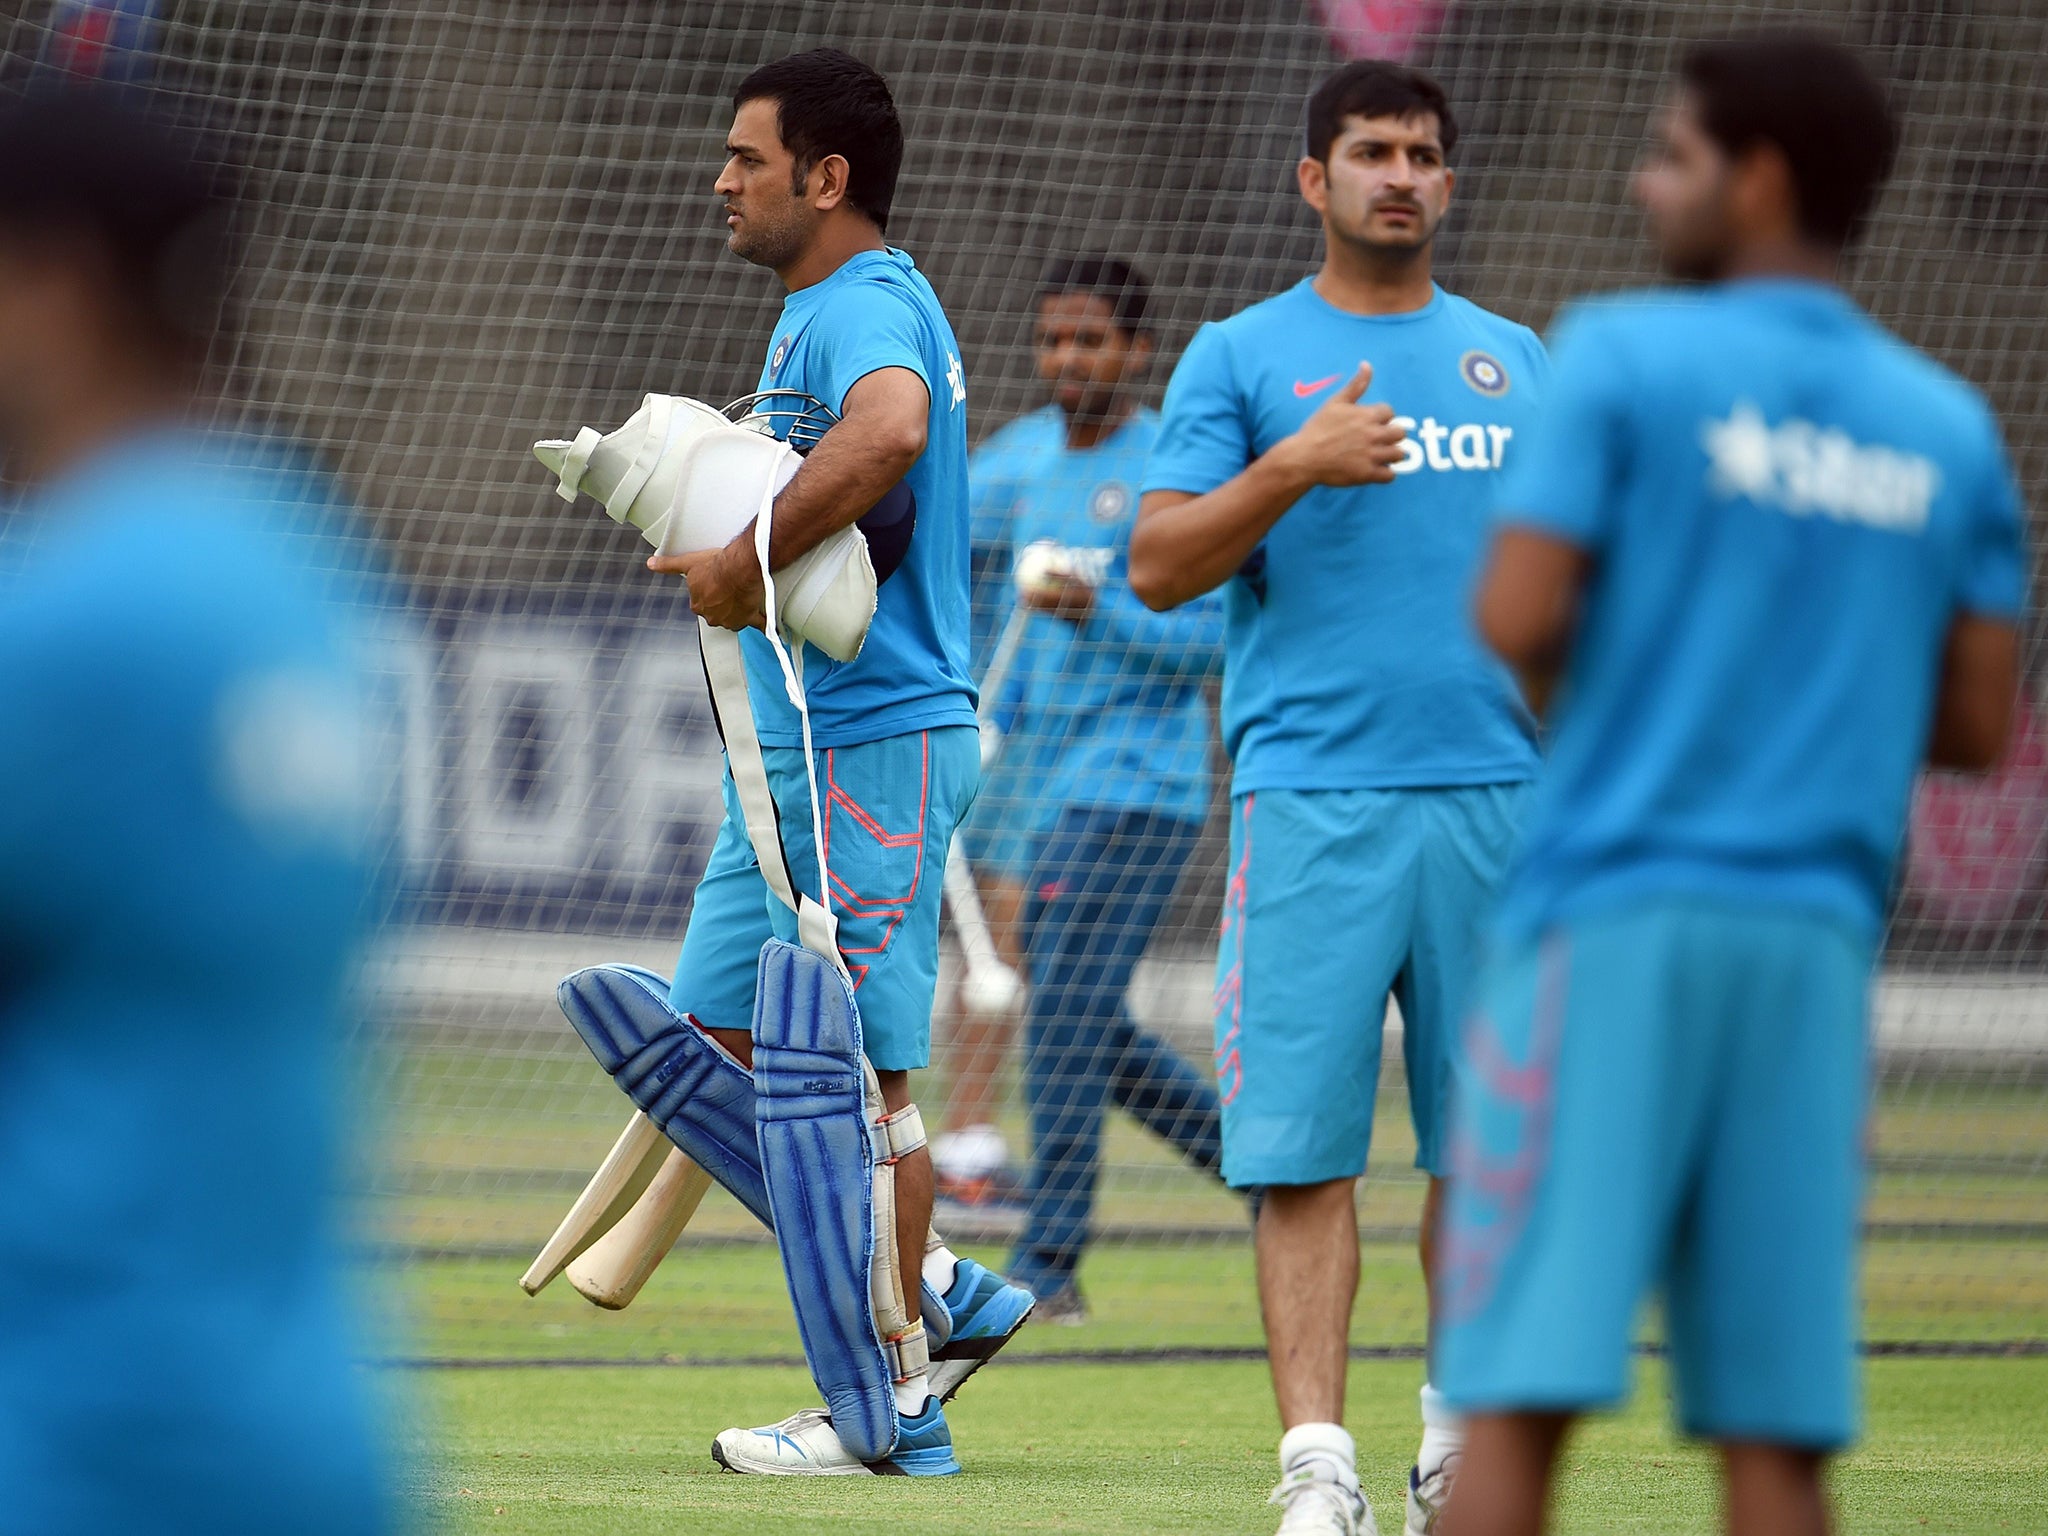 MS Dhoni, who will lead India against Pakistan tomorrow, walks out to bat during
a training session in Adelaide yesterday